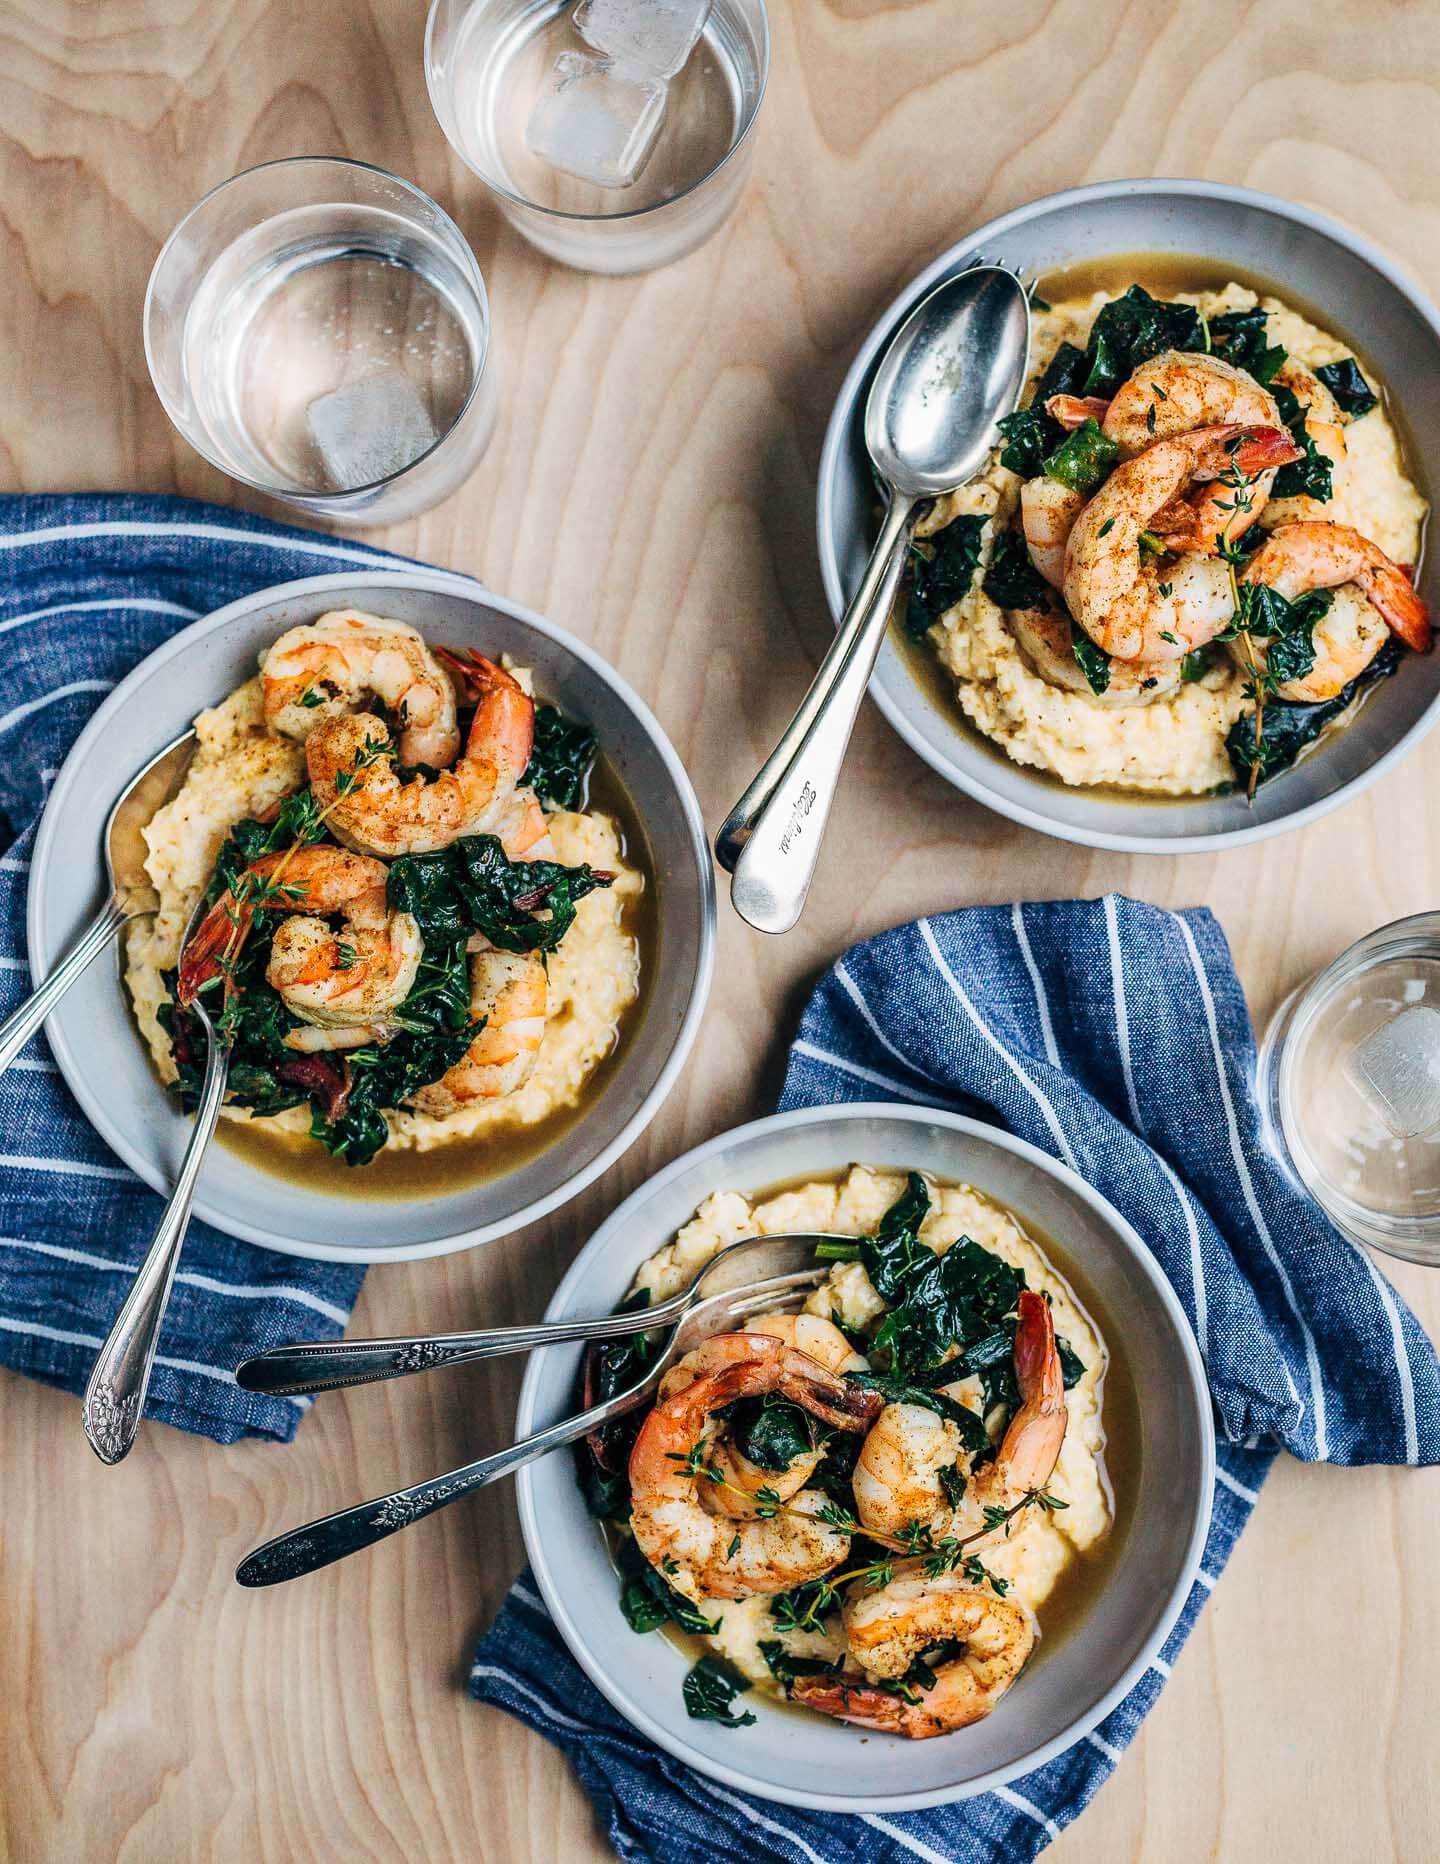 Add some leafy greens to your shrimp and grits! This recipe for shrimp and grits and greens features delicate shrimp, toothsome stone ground grits, and tender leafy greens.